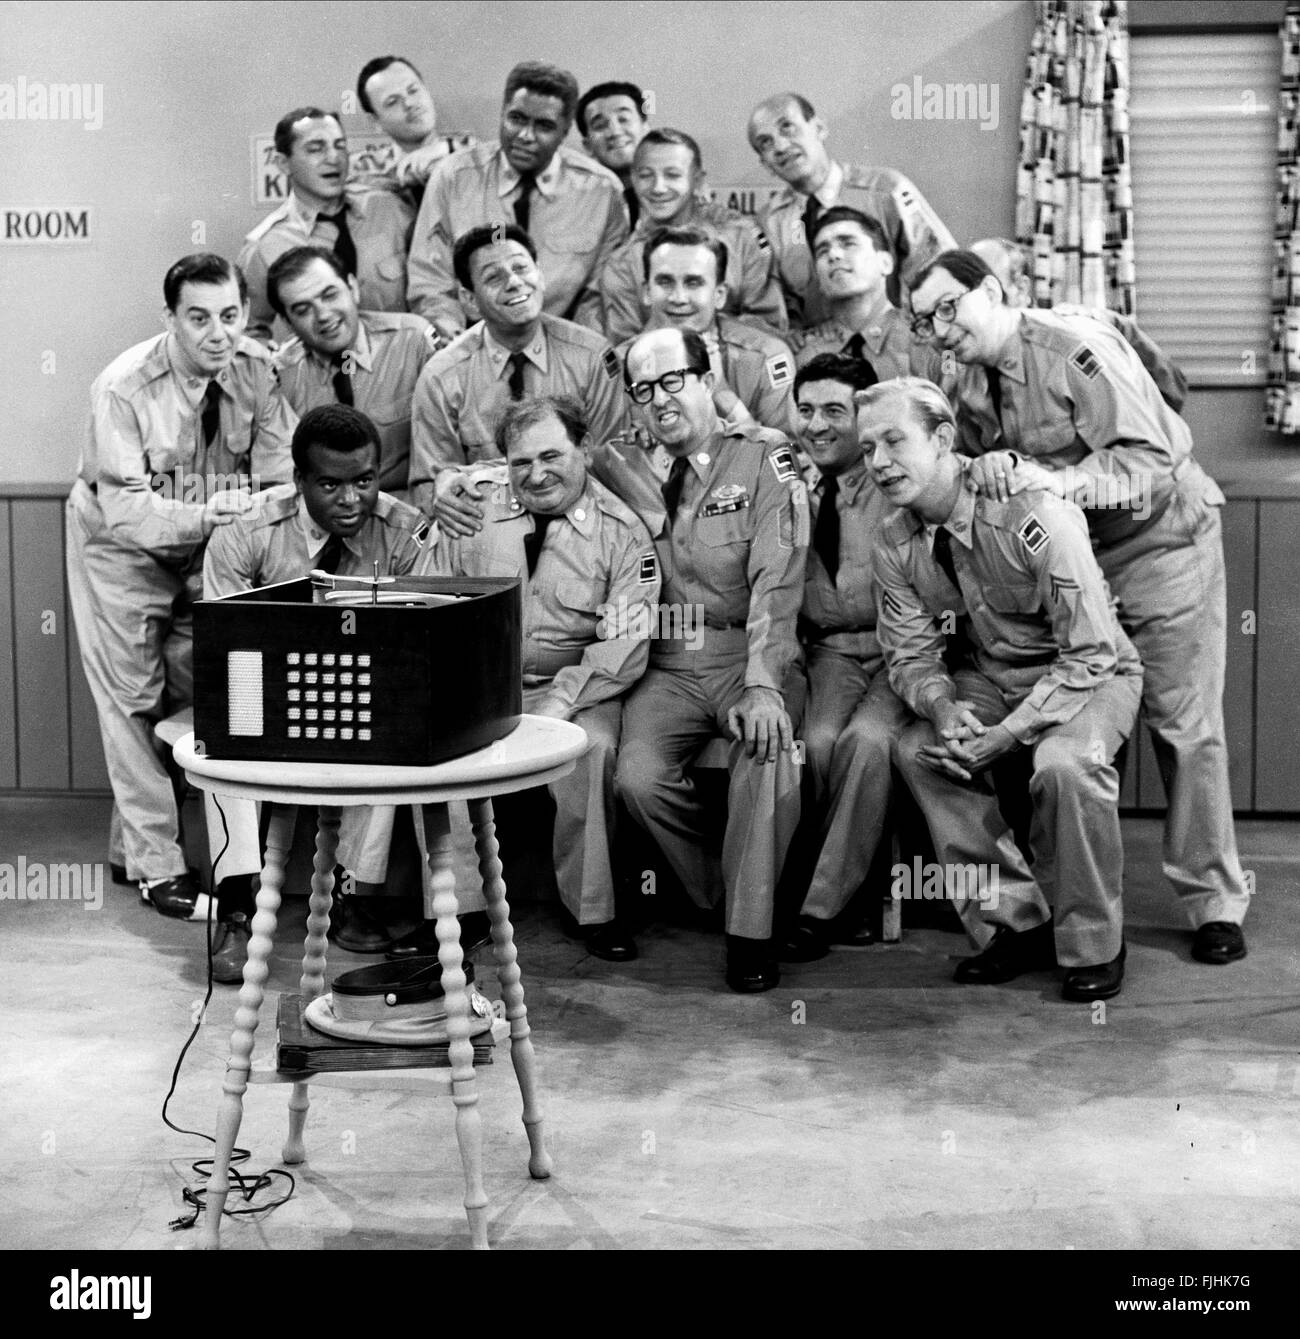 PHIL SILVERS & CAST THE PHIL SILVERS SHOW; SERGEANT BILKO (1955 Stock Photo: 97503940 ...1300 x 1339